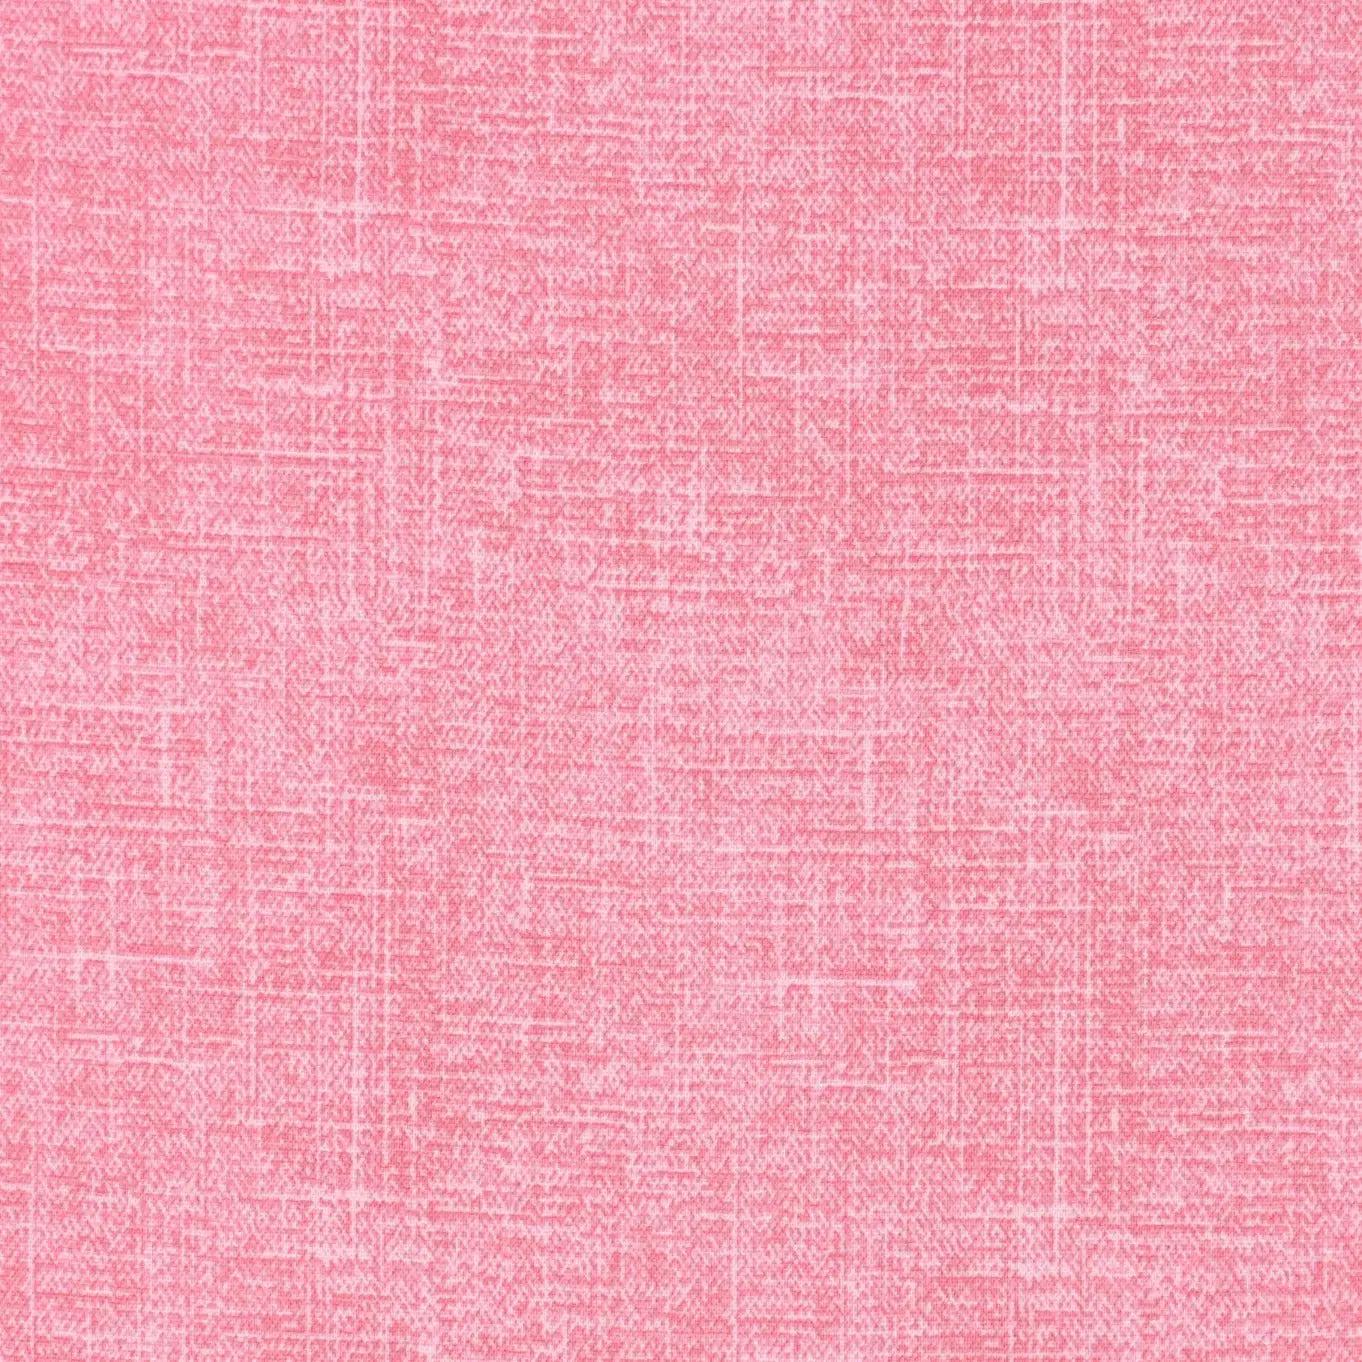 Pink Light Grain of Color Cotton Wideback Fabric ( 1 1/2 Yard Pack )